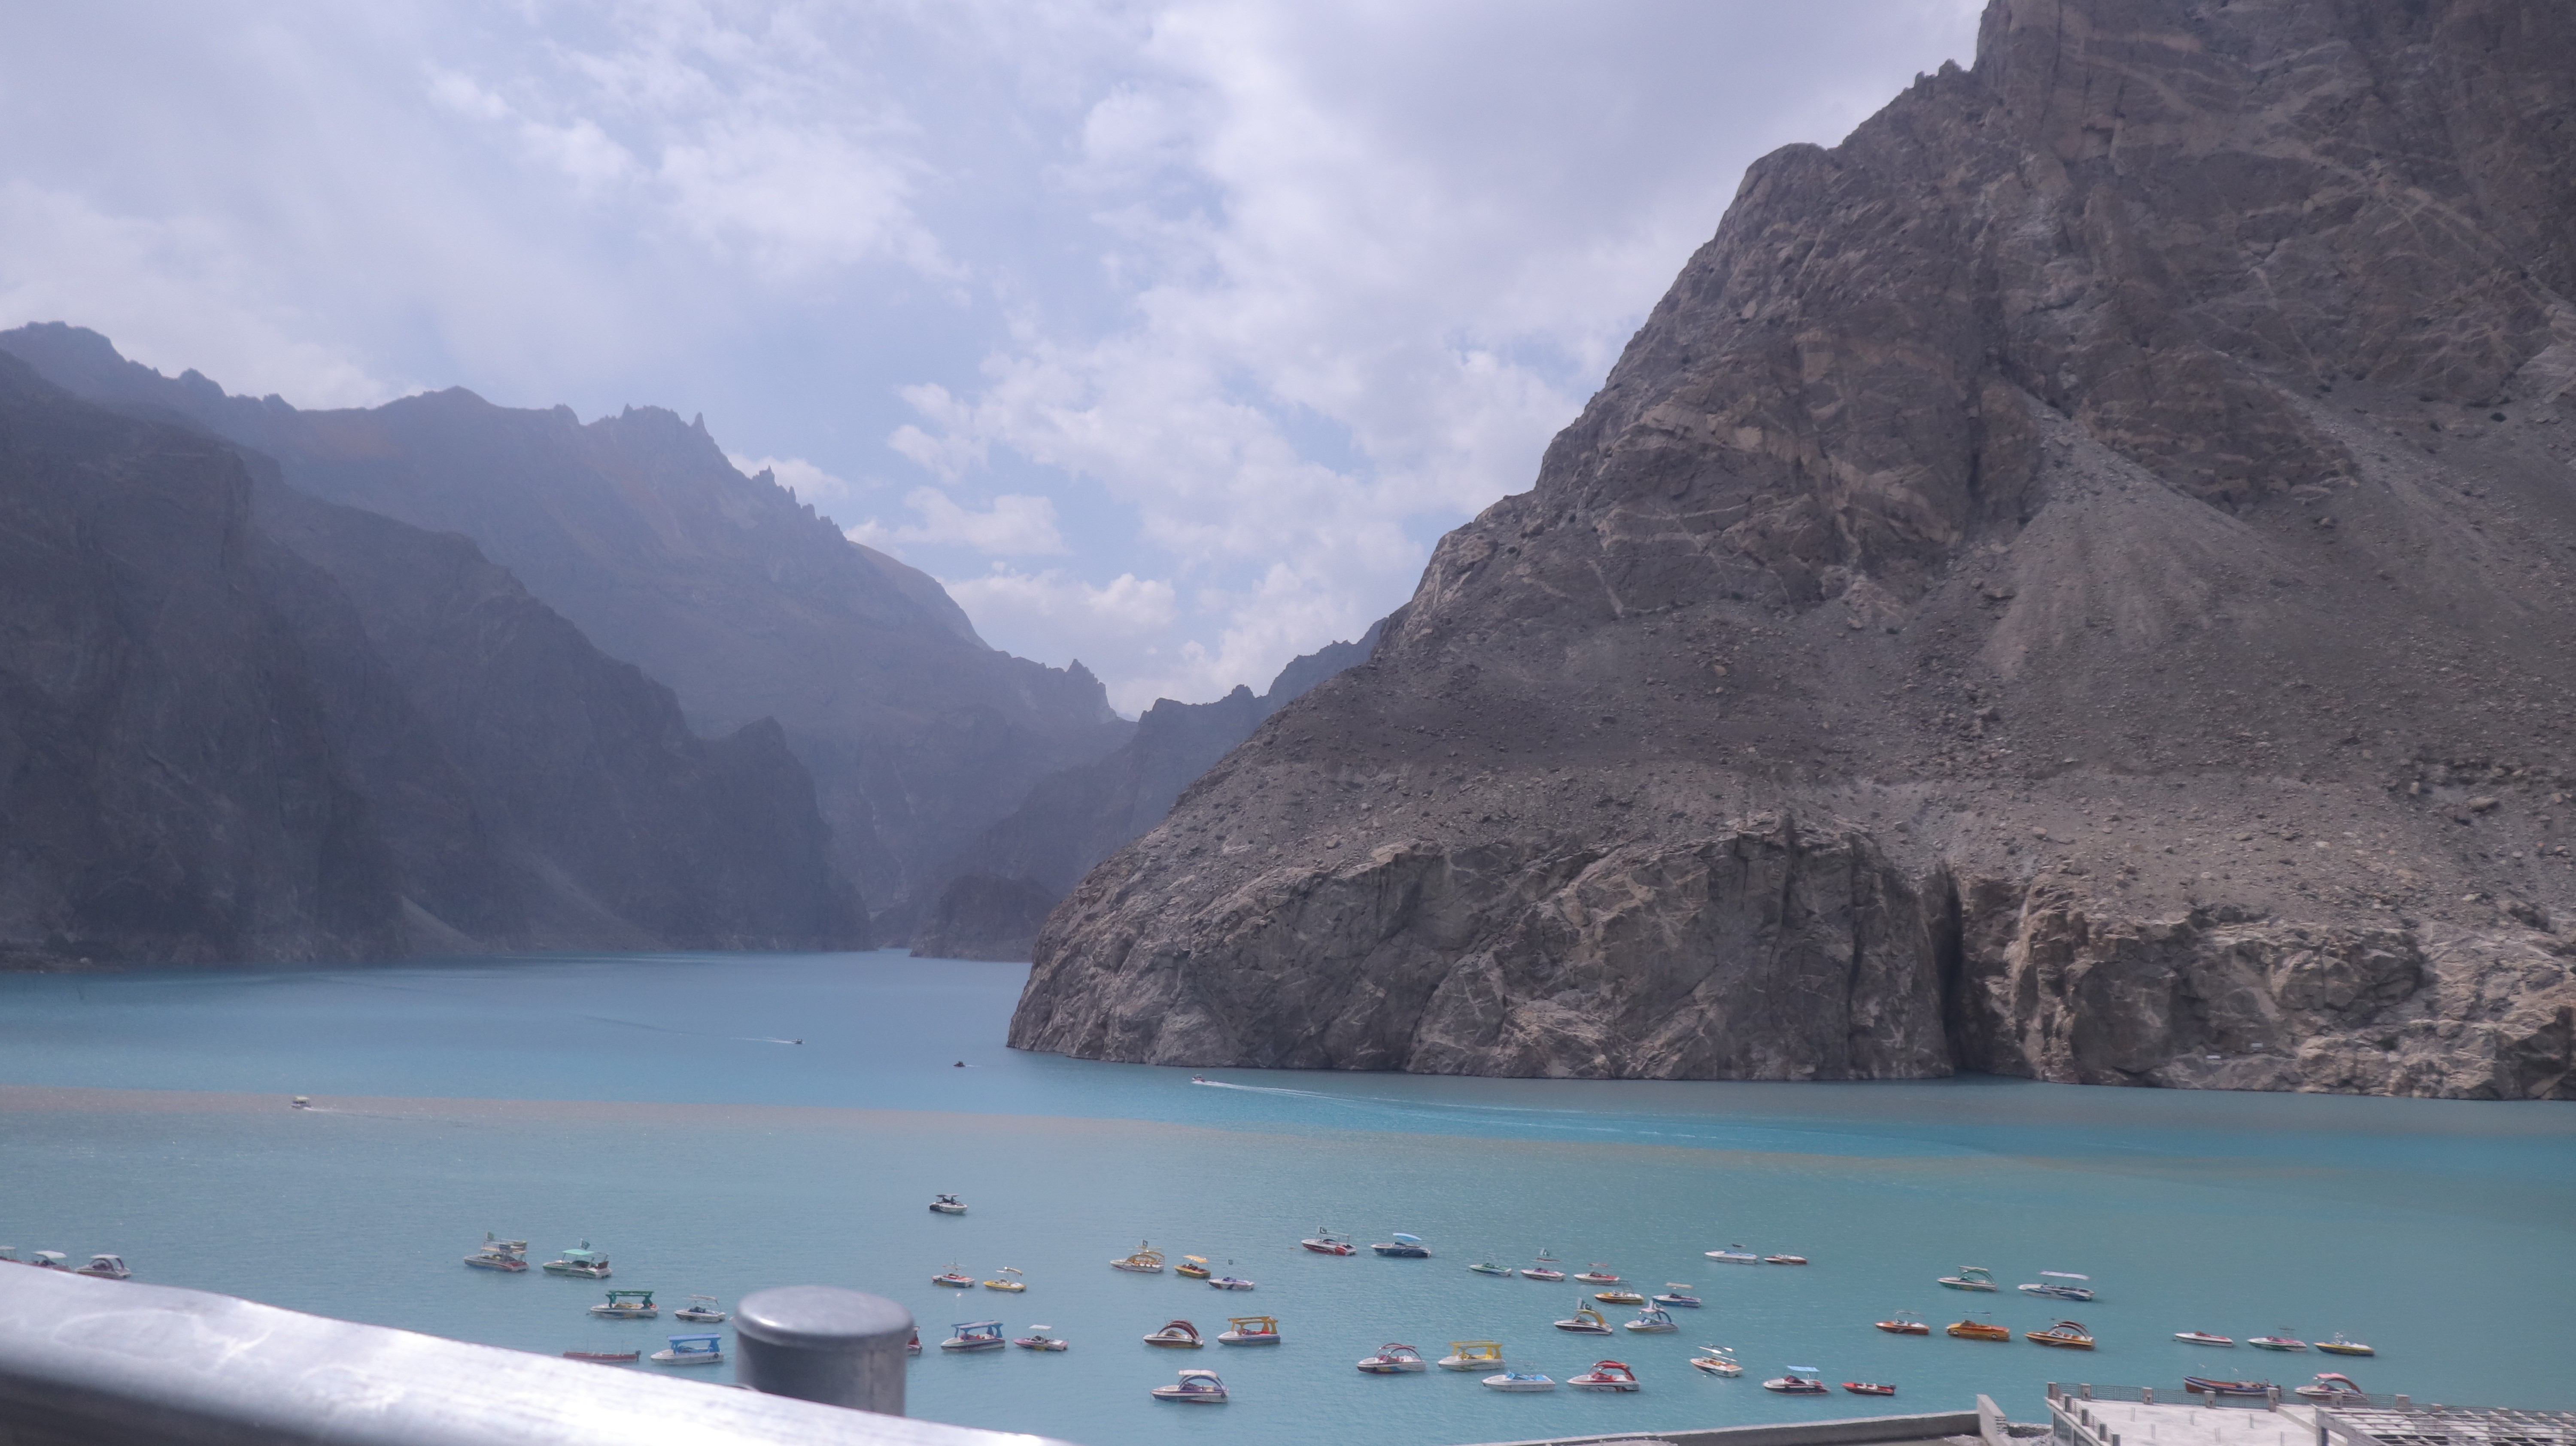 The panaromic view of attabad lake along with yachts